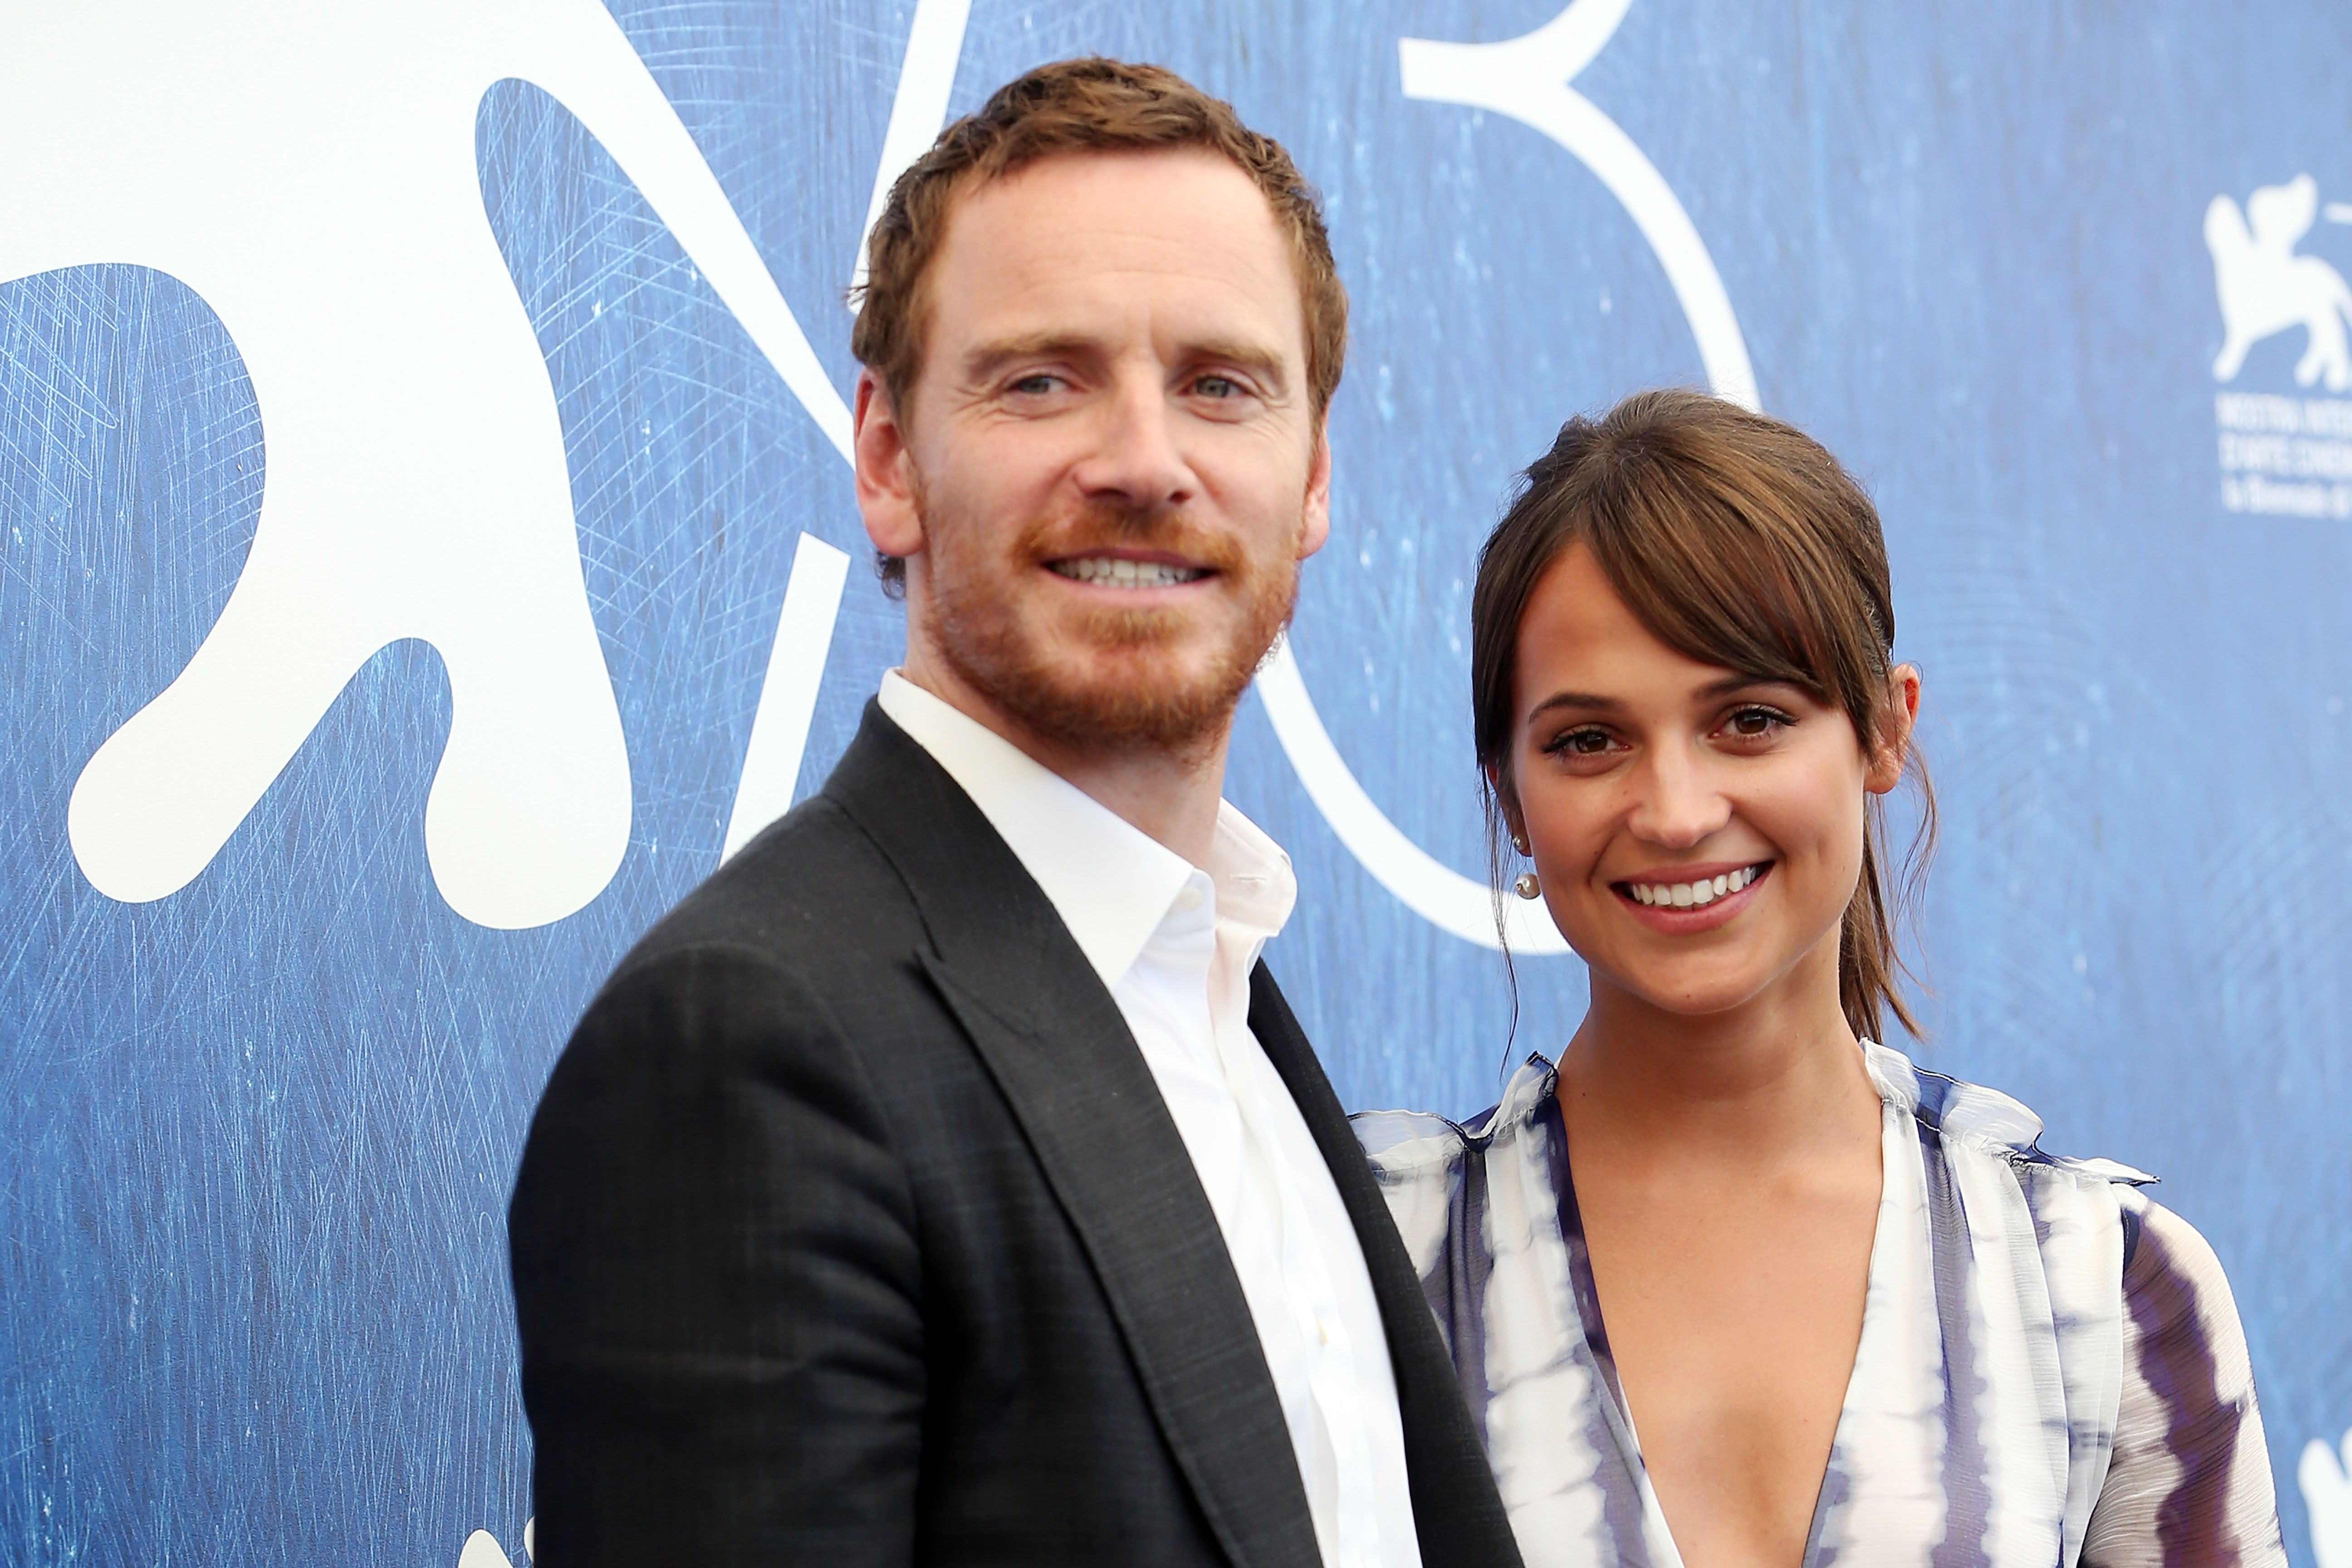 Michael Fassbender, Alicia Vikander privately welcomed baby